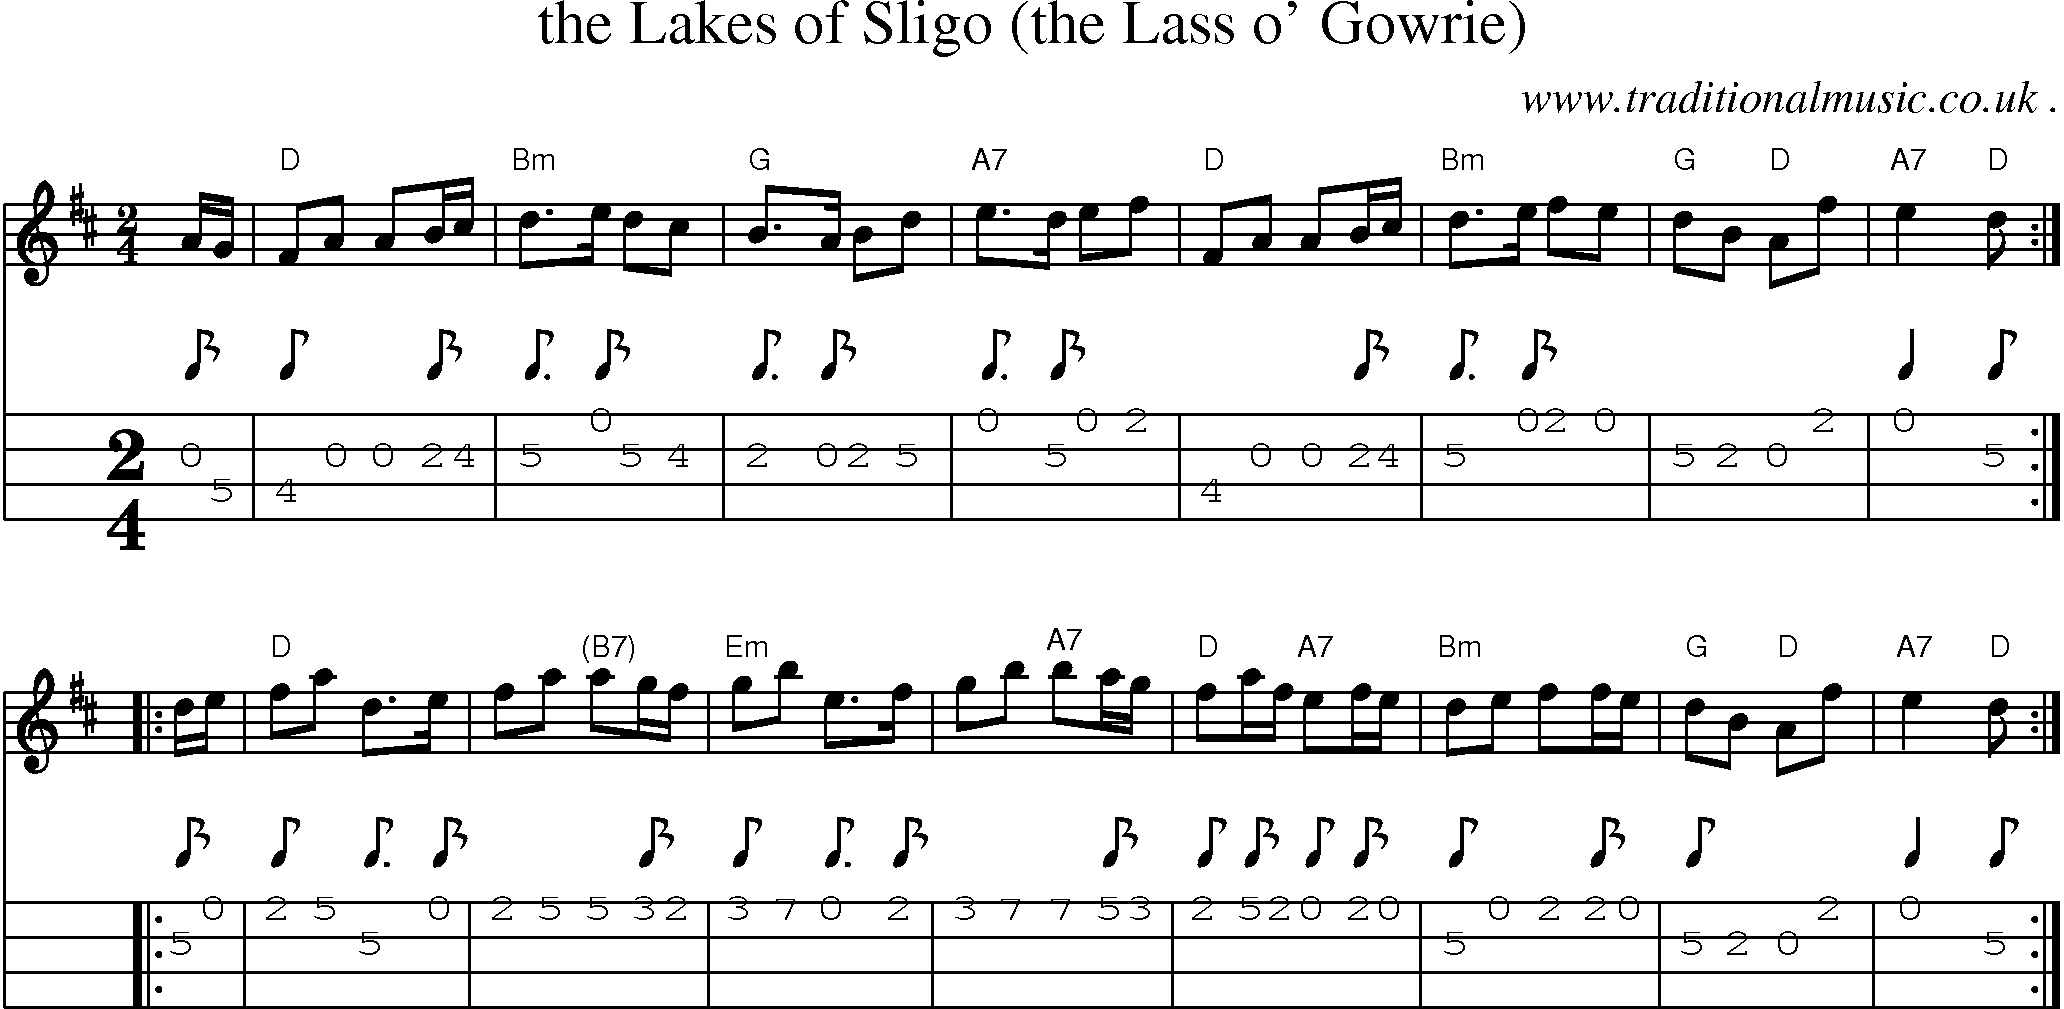 Sheet-music  score, Chords and Mandolin Tabs for The Lakes Of Sligo The Lass O Gowrie